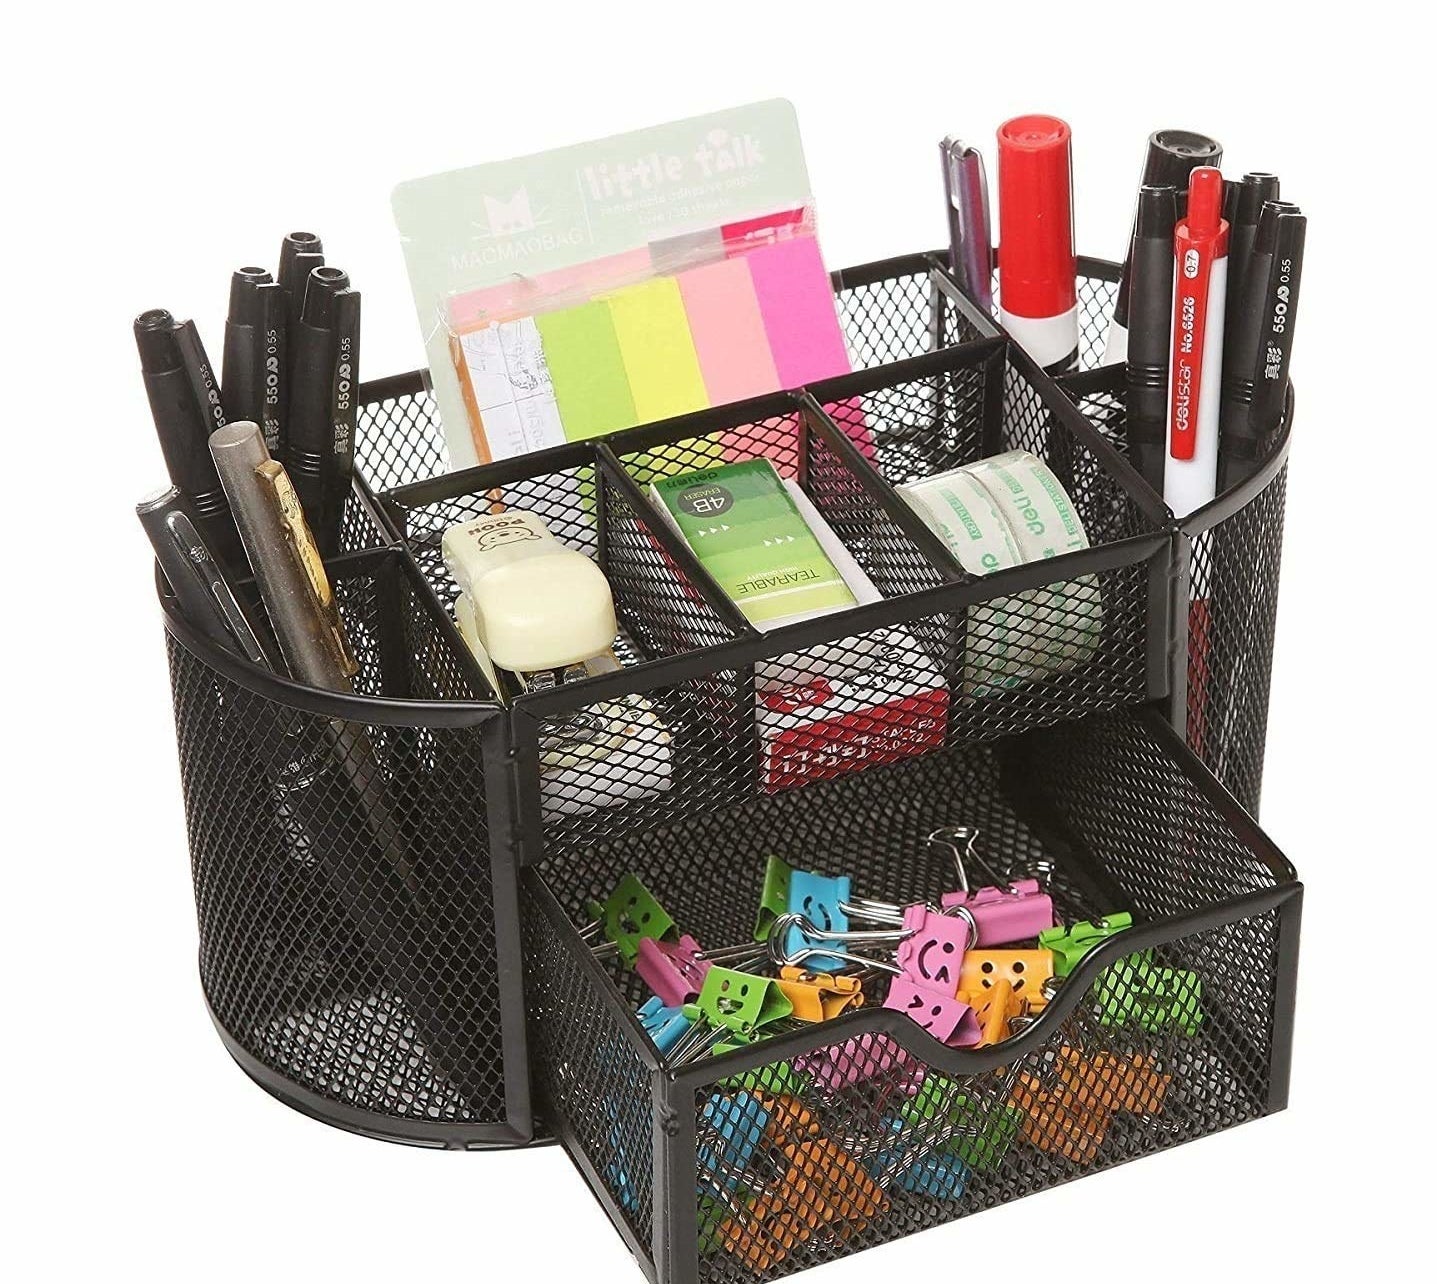 A black metal mesh desk organiser with multiple stationery items in it.